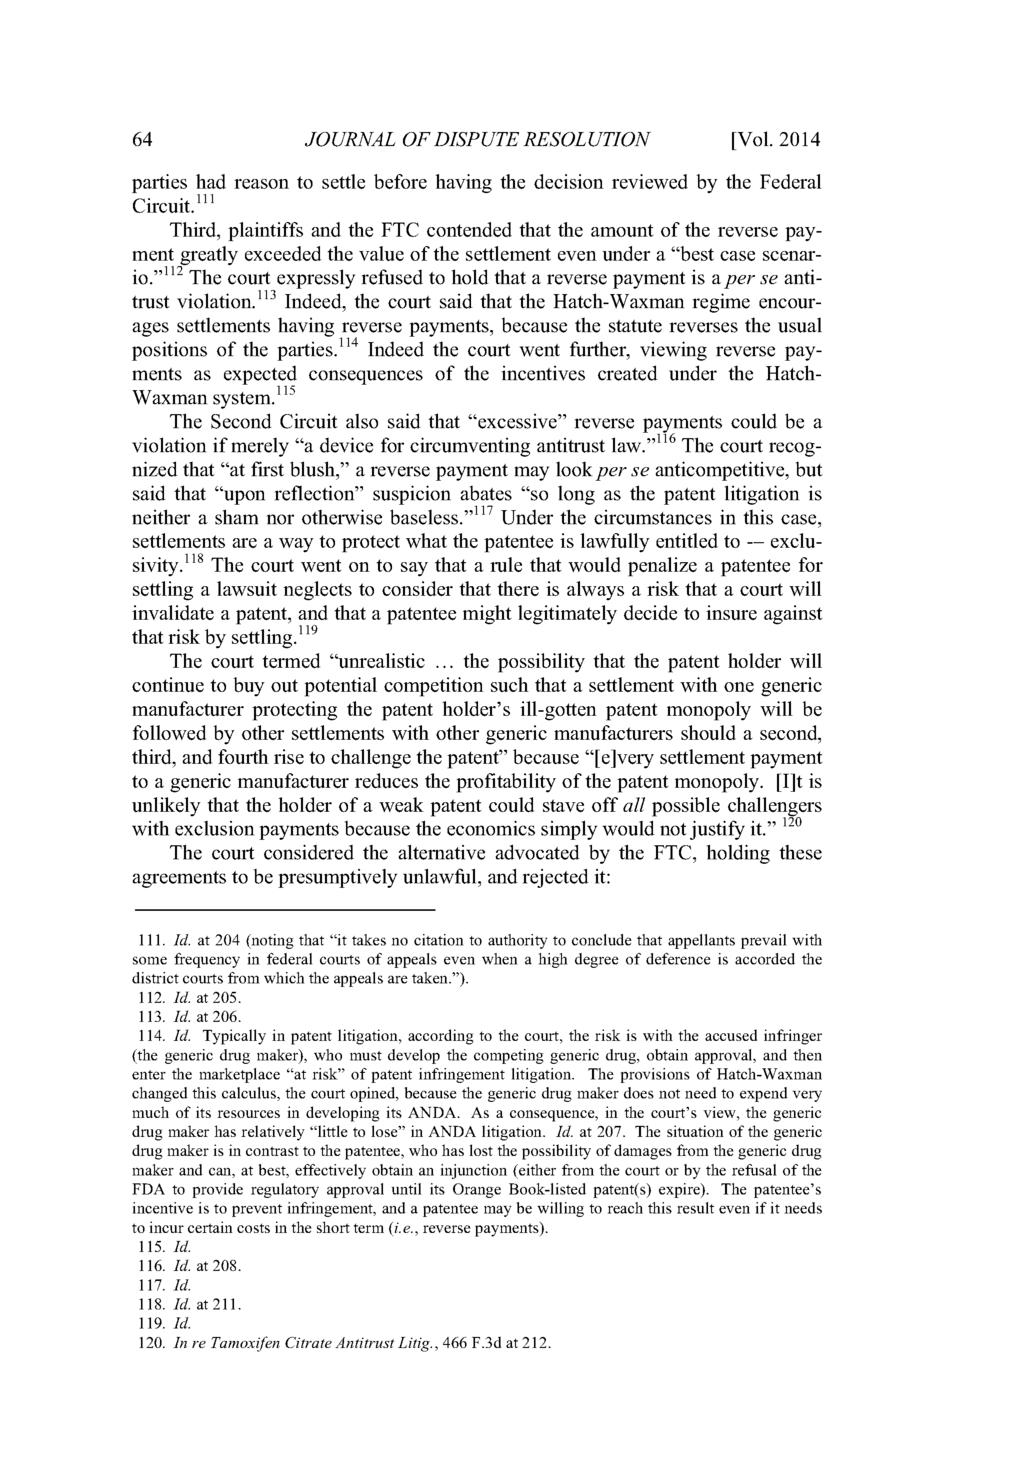 Journal of Dispute Resolution, Vol. 2014, Iss. 1 [2014], Art. 5 64 JOURNAL OF DISPUTE RESOLUTION [Vol. 2014 parties had reason to settle before having the decision reviewed by the Federal Circuit.